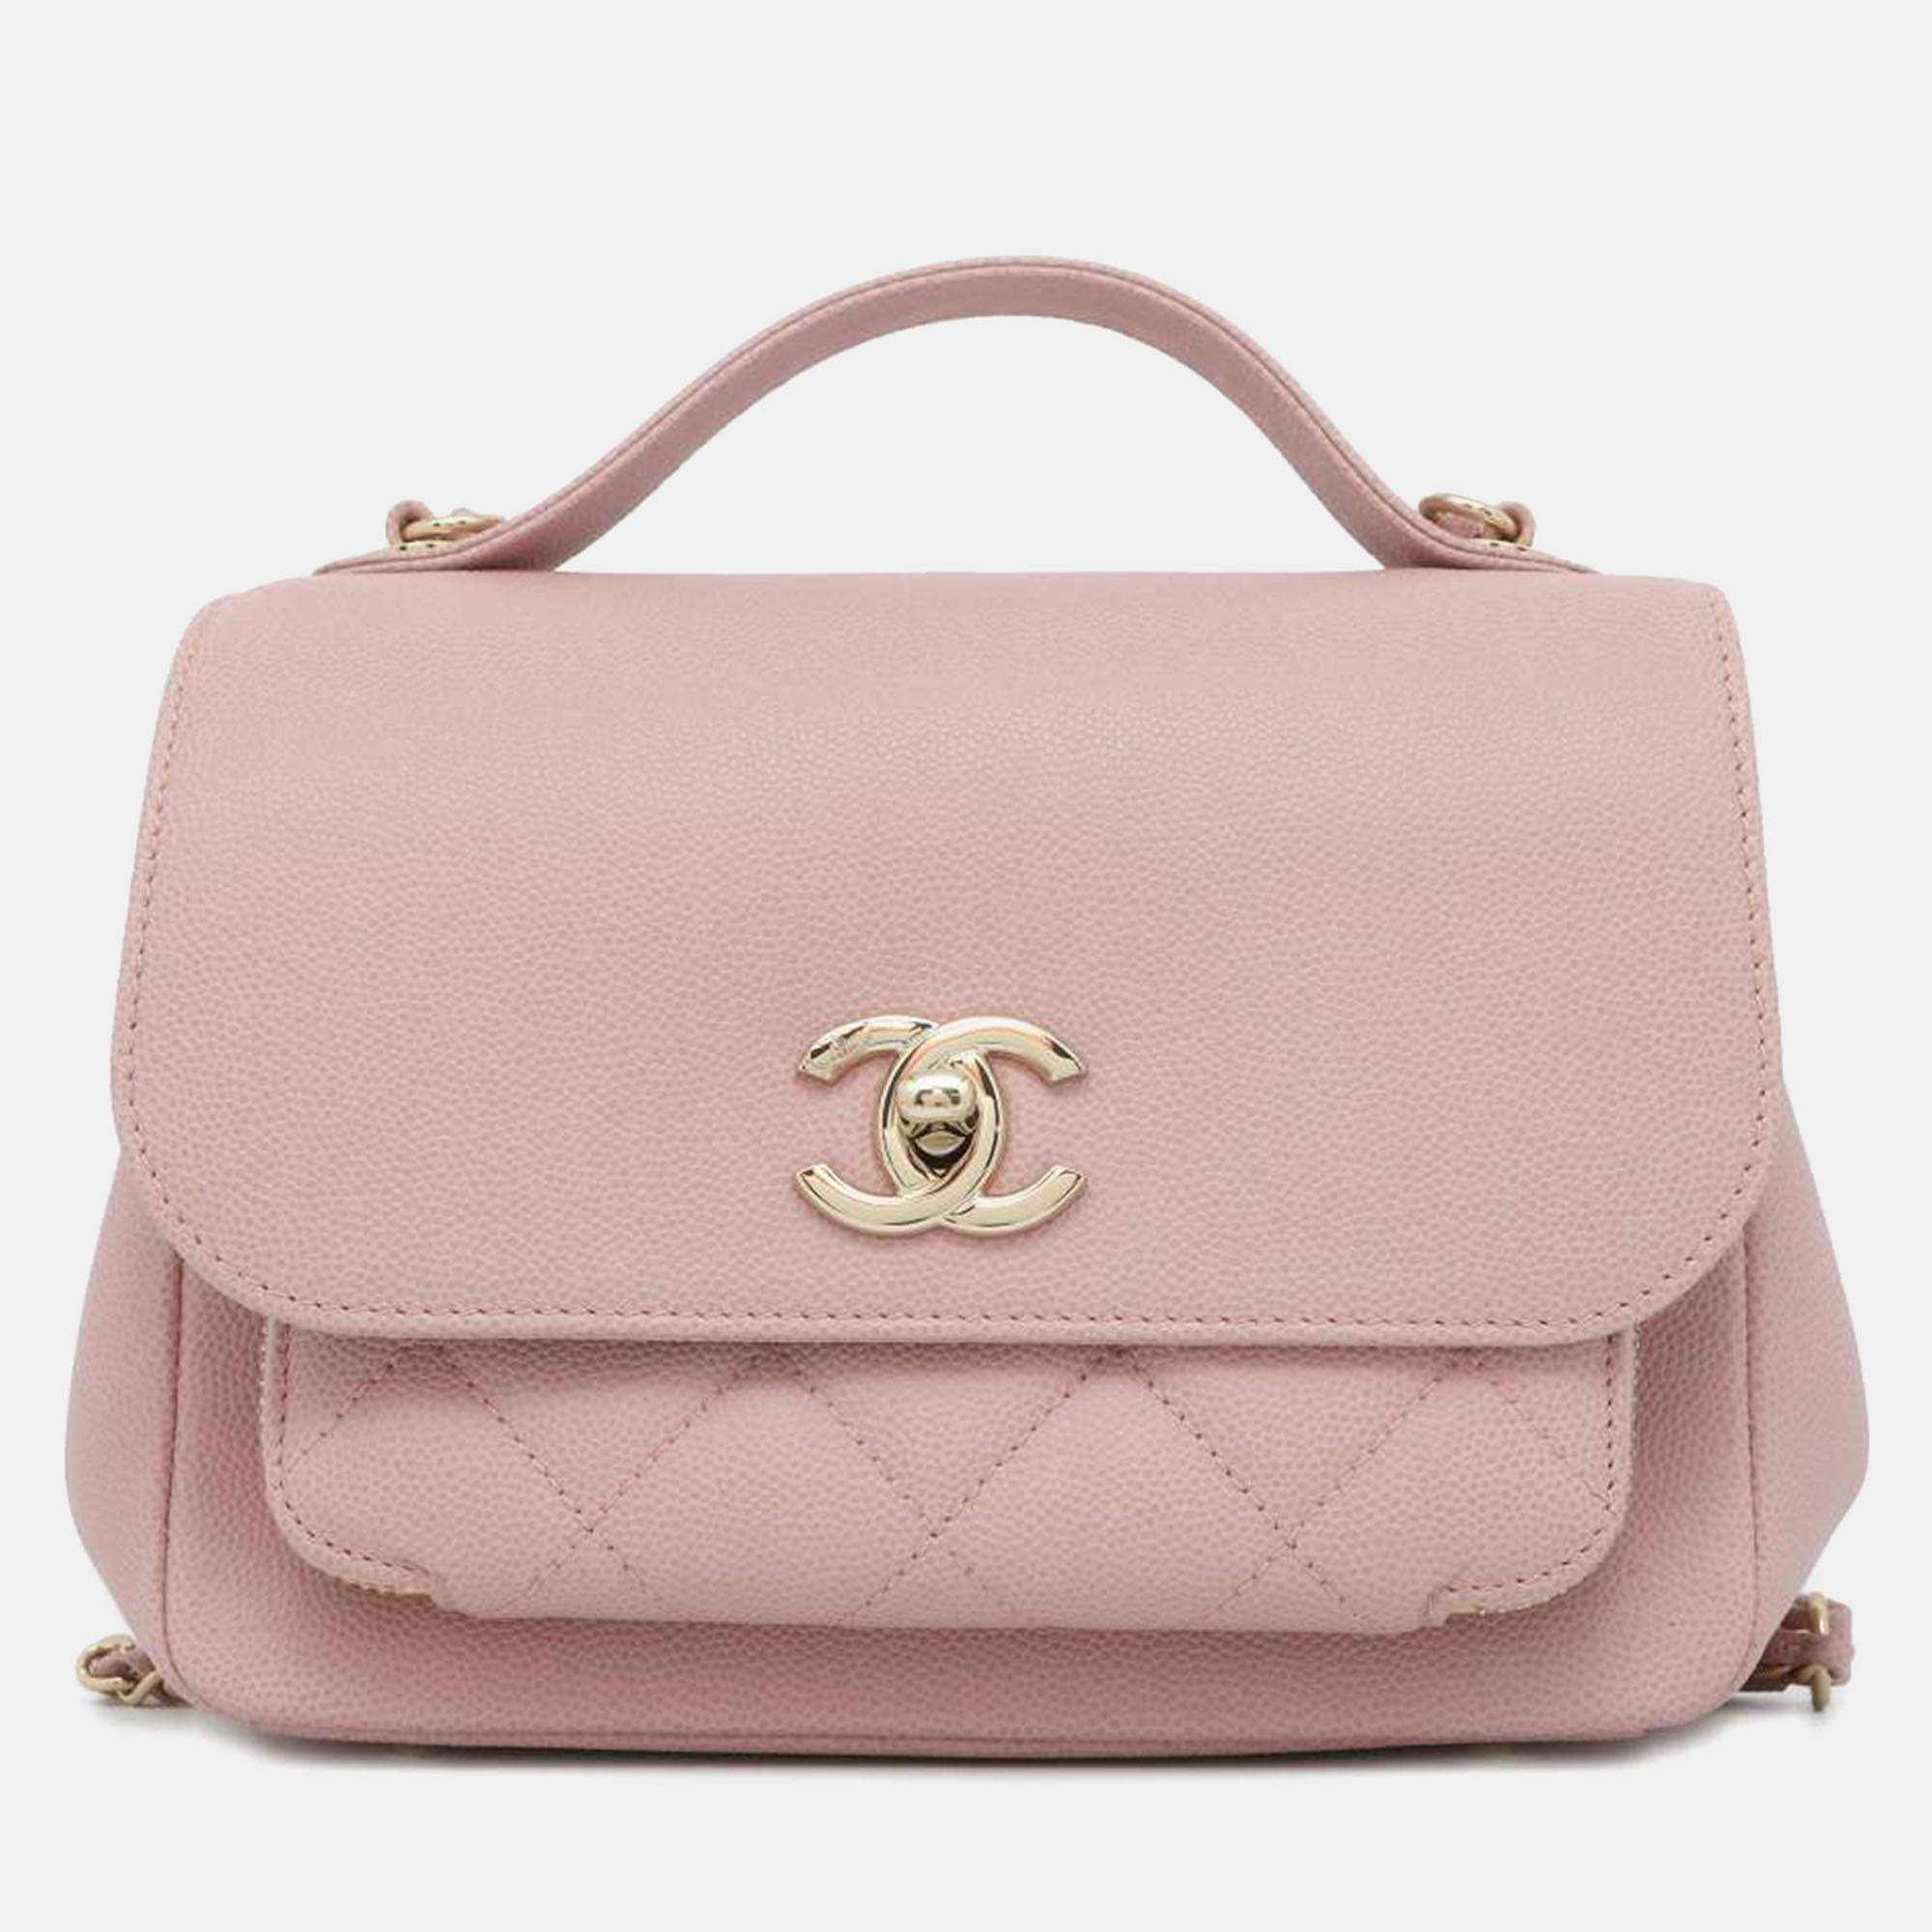 Chanel pink caviar leather business affinity flap bag